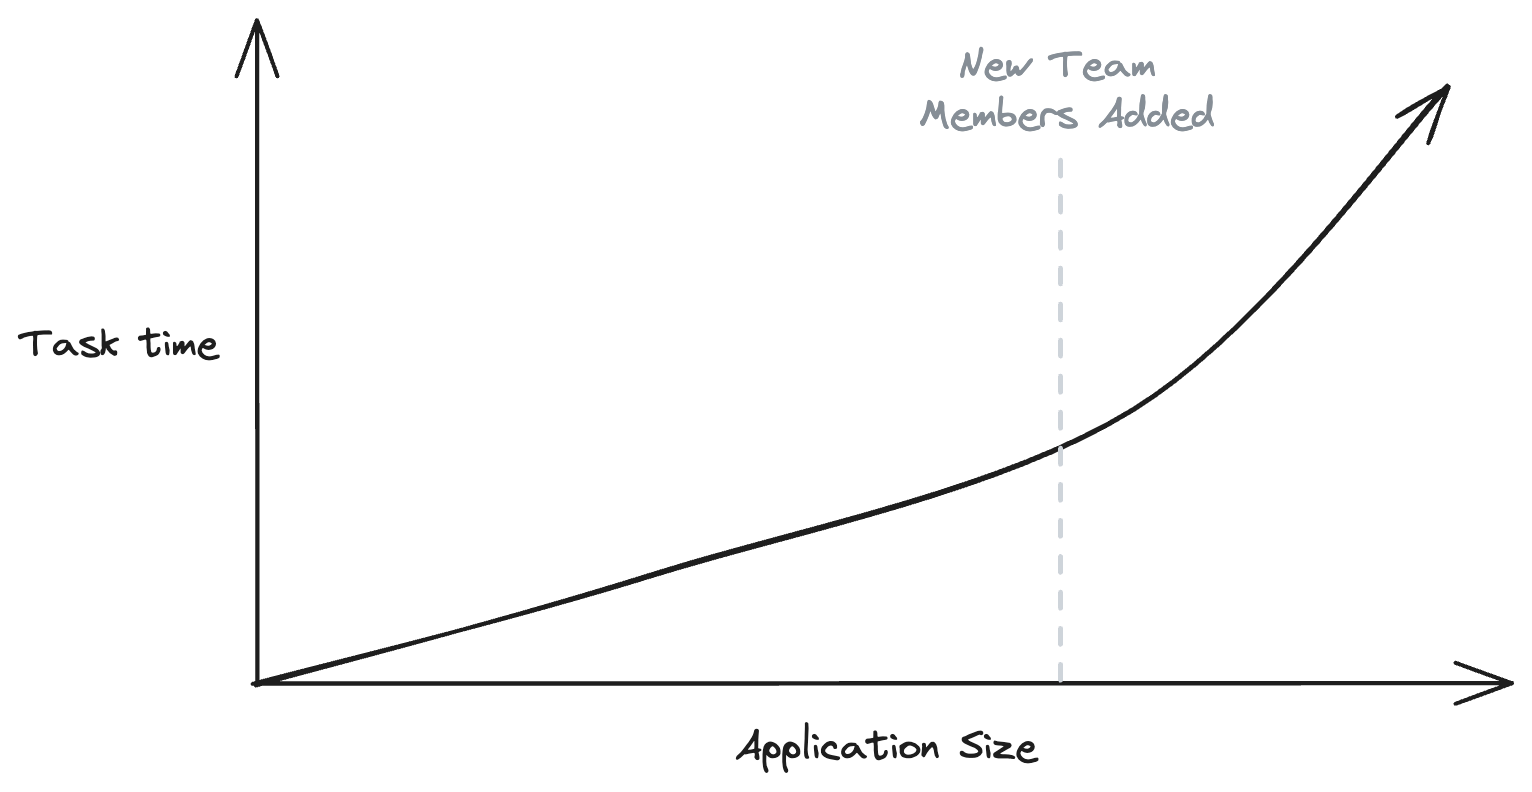 A graph showing increasing task time as applications get larger